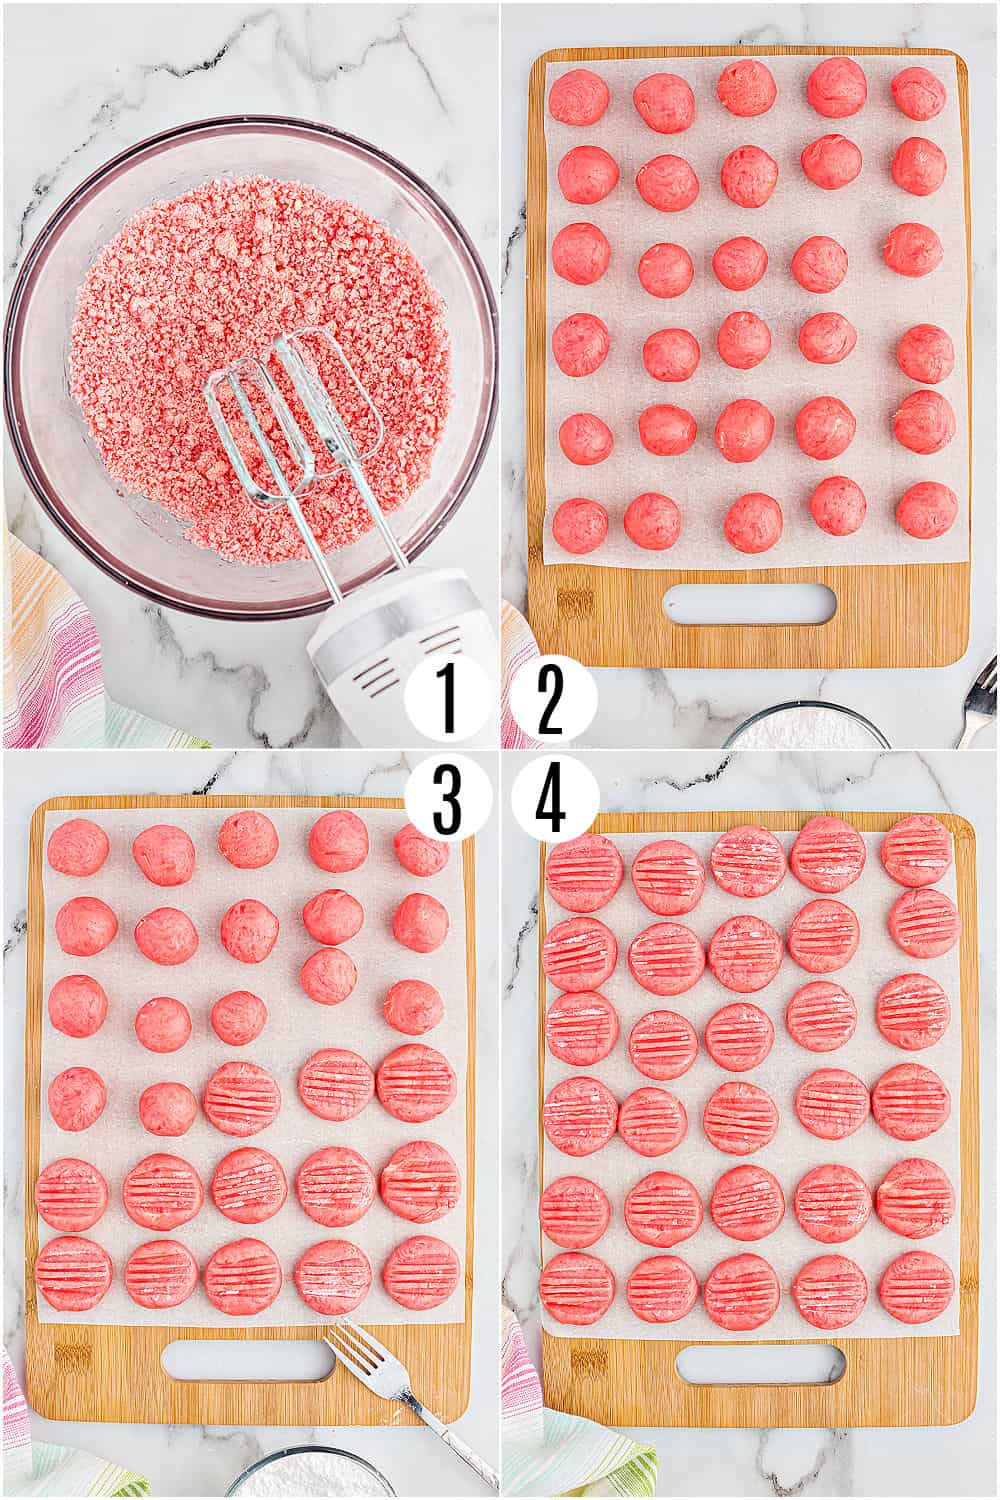 Step by step photos showing how to make strawberry mints.